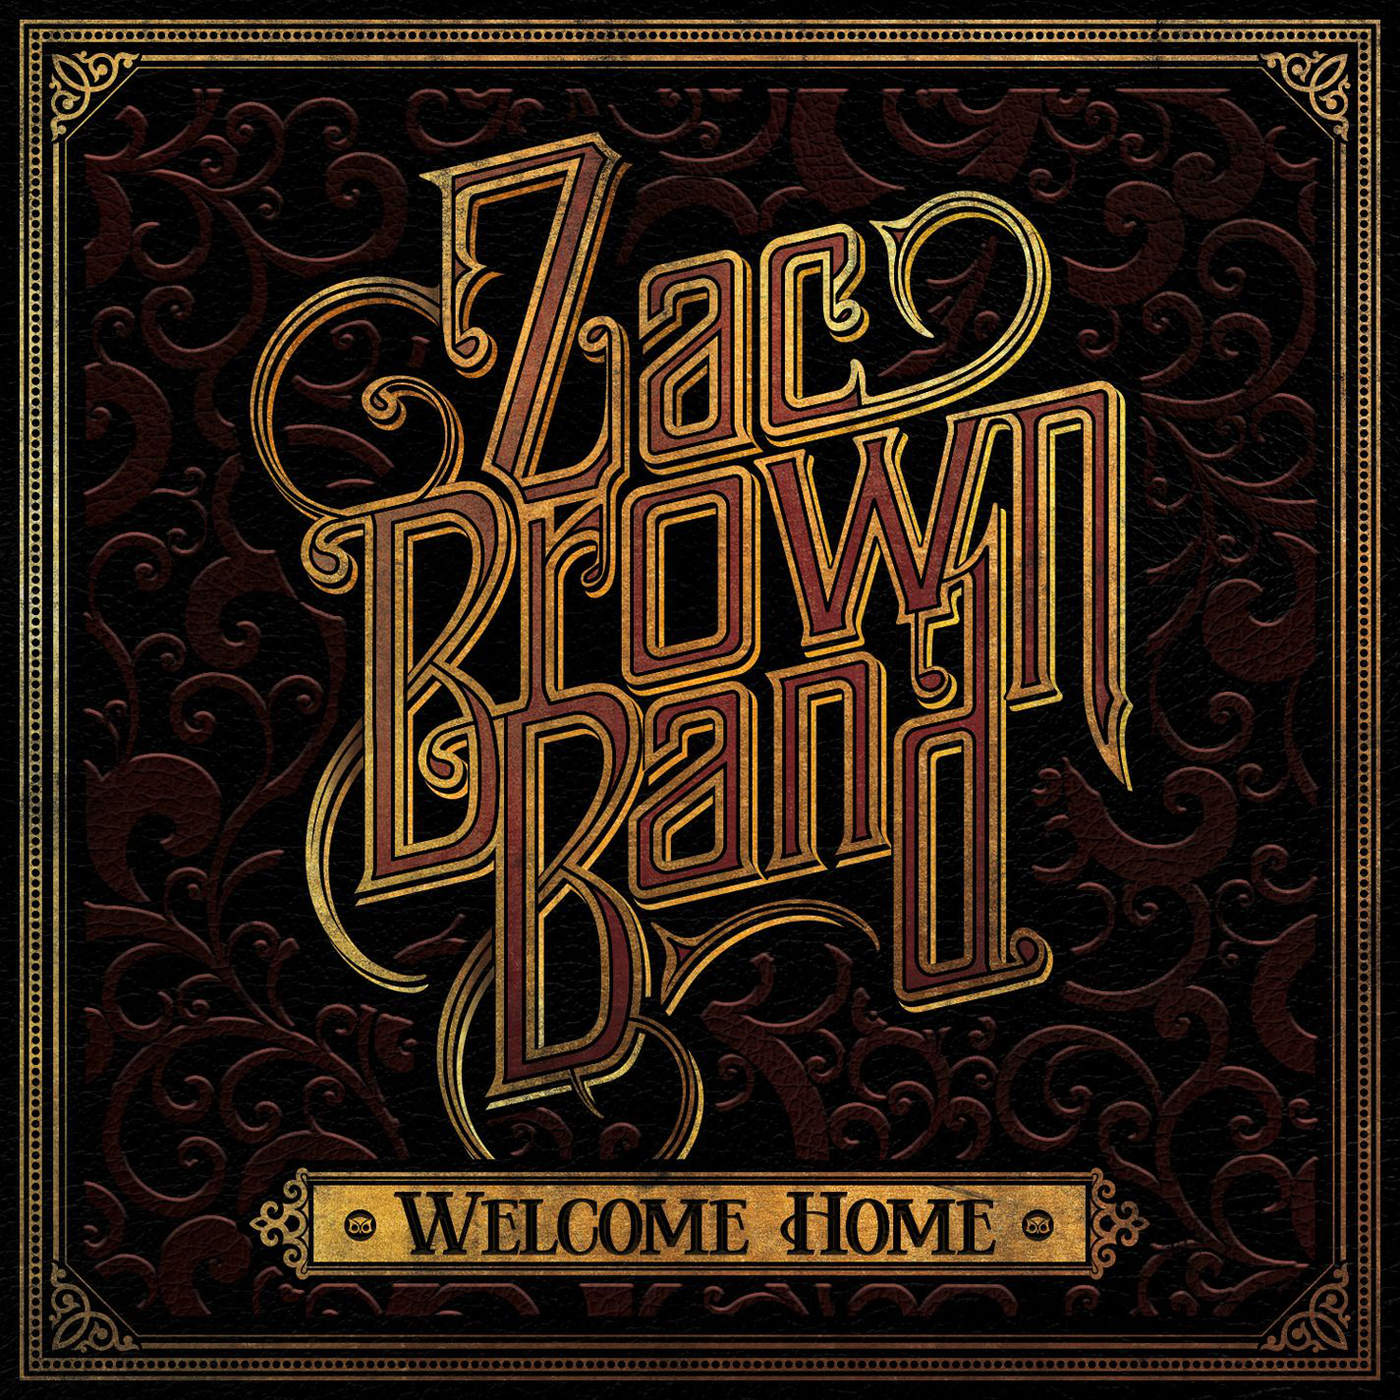 Art for My Old Man by Zac Brown Band